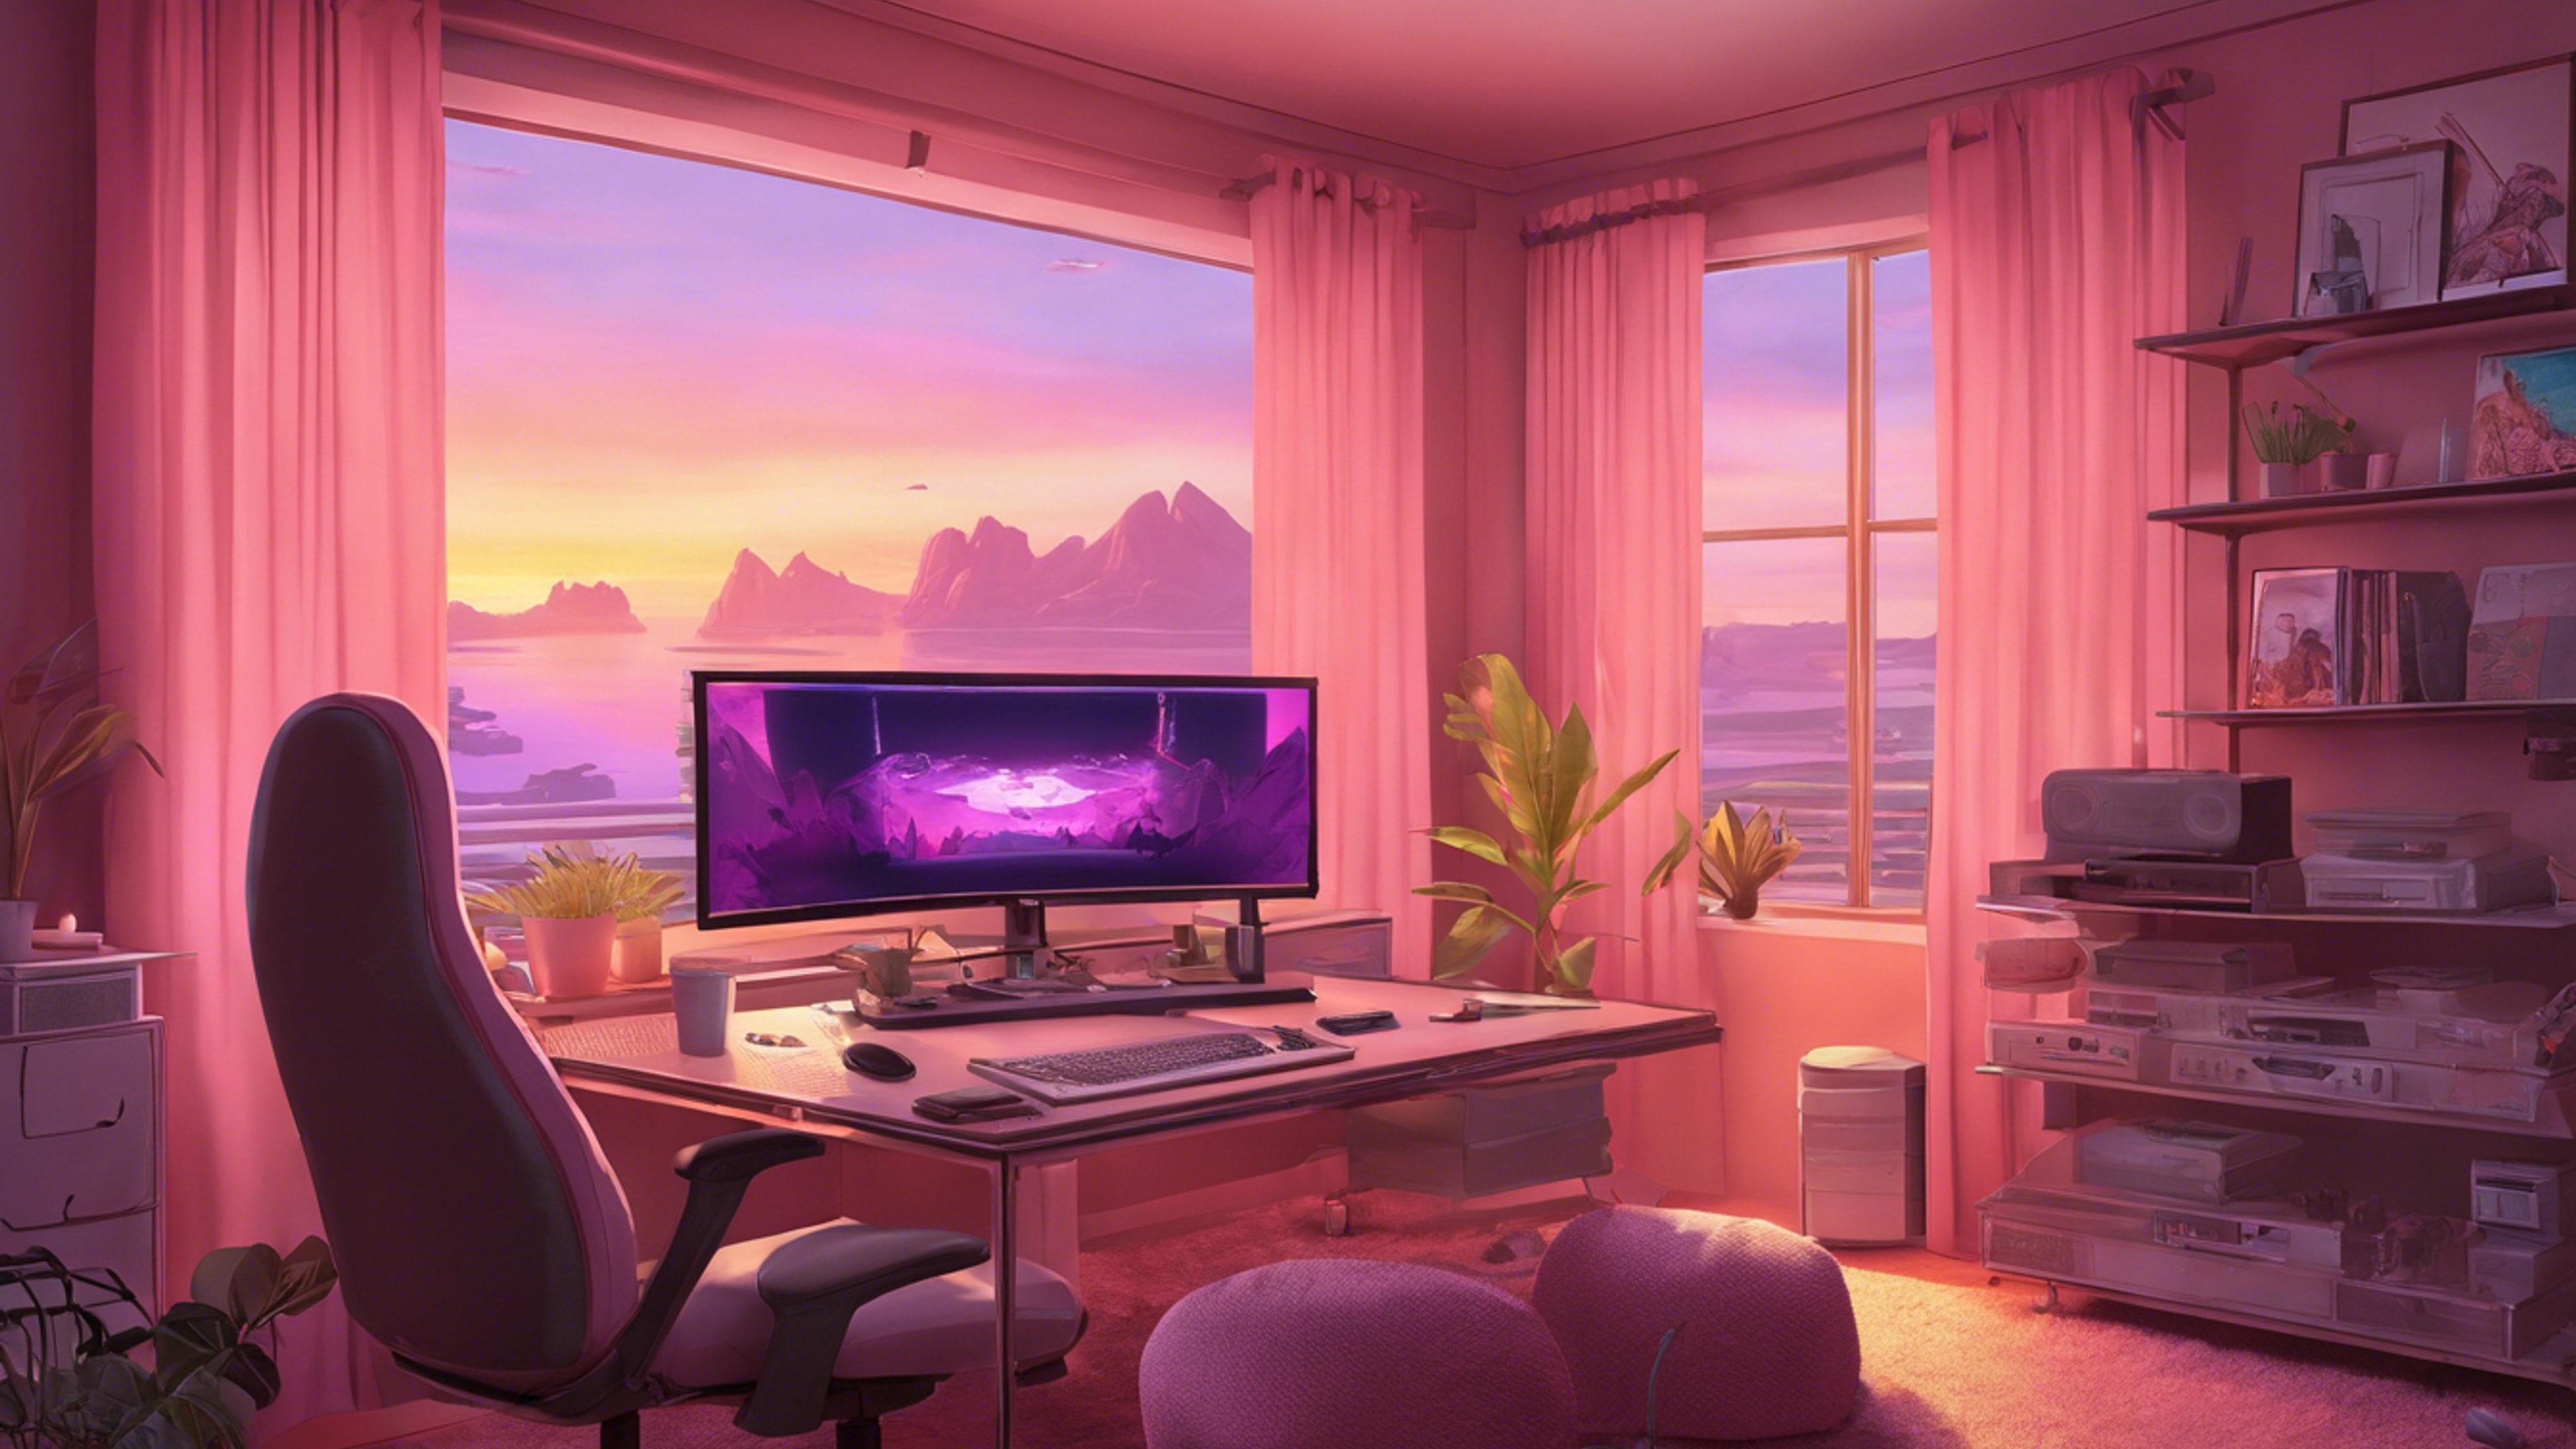 A beautiful shot of a gaming room at dusk with pastel pink curtains slightly drawn, allowing soft sunset hues to blend with the gaming setup's ambient light. Taustakuva[98f2c4ff56214265aa5c]